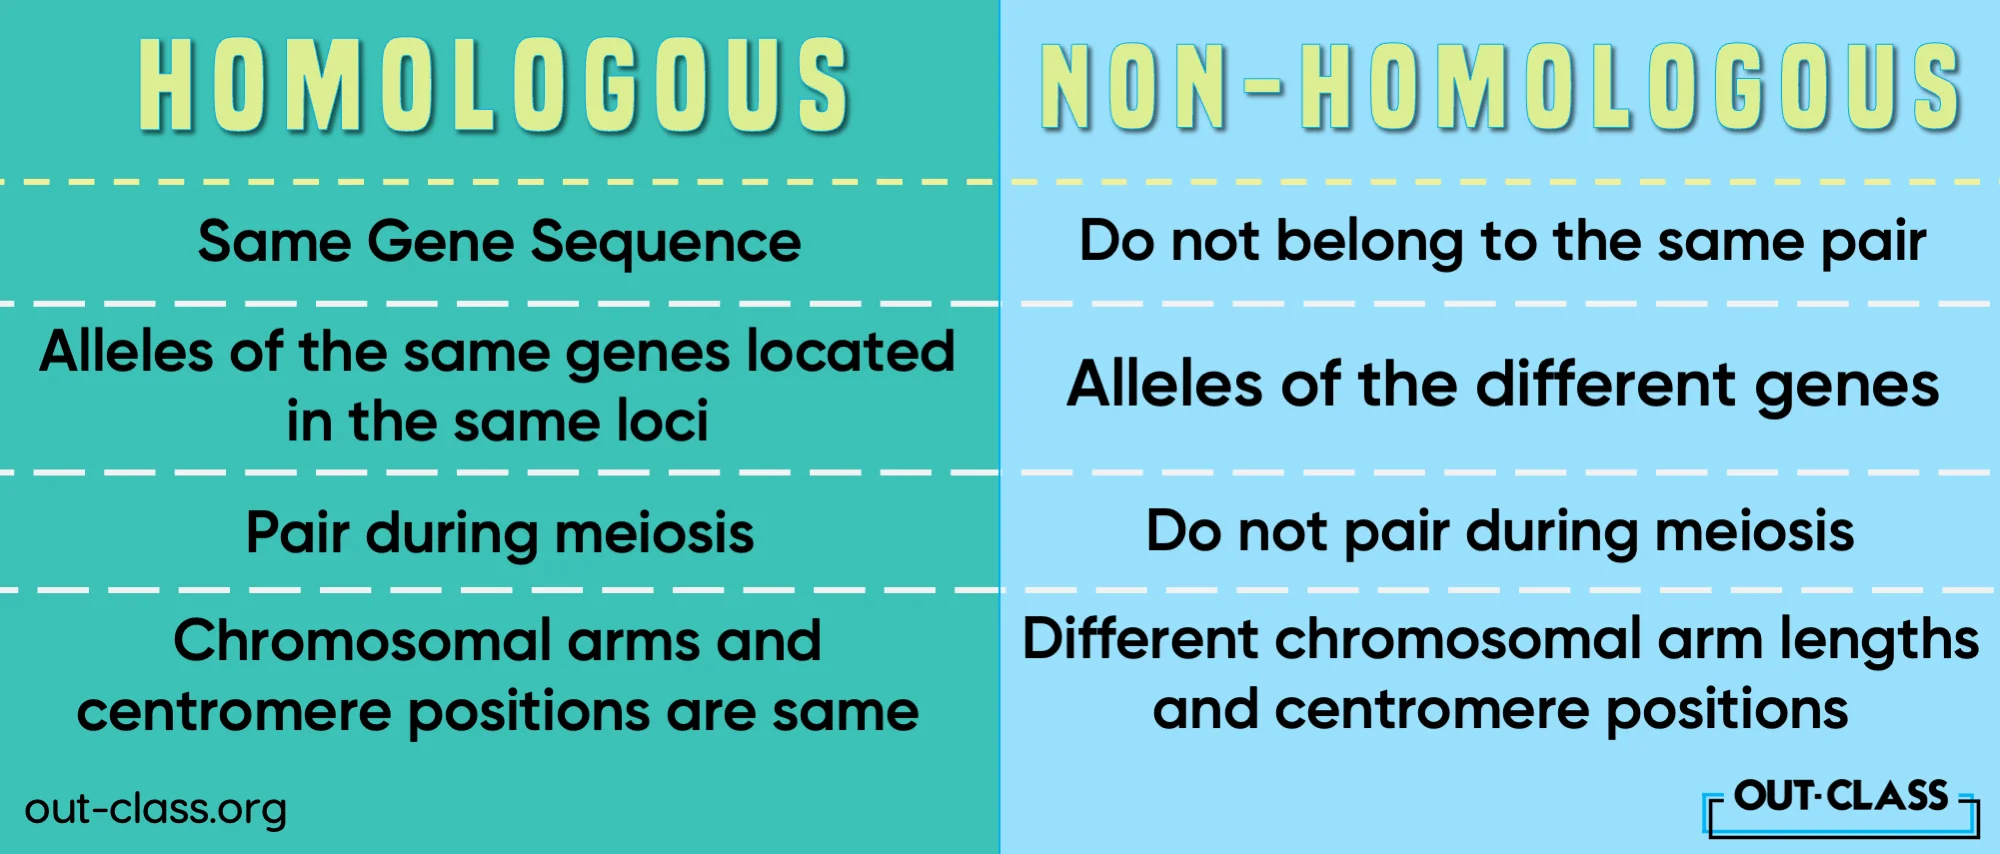 It shows the difference between homologous and non-homologous chromosomes in O Level Biology. As well as provides examples of homologous and non-homologous chromosomes.